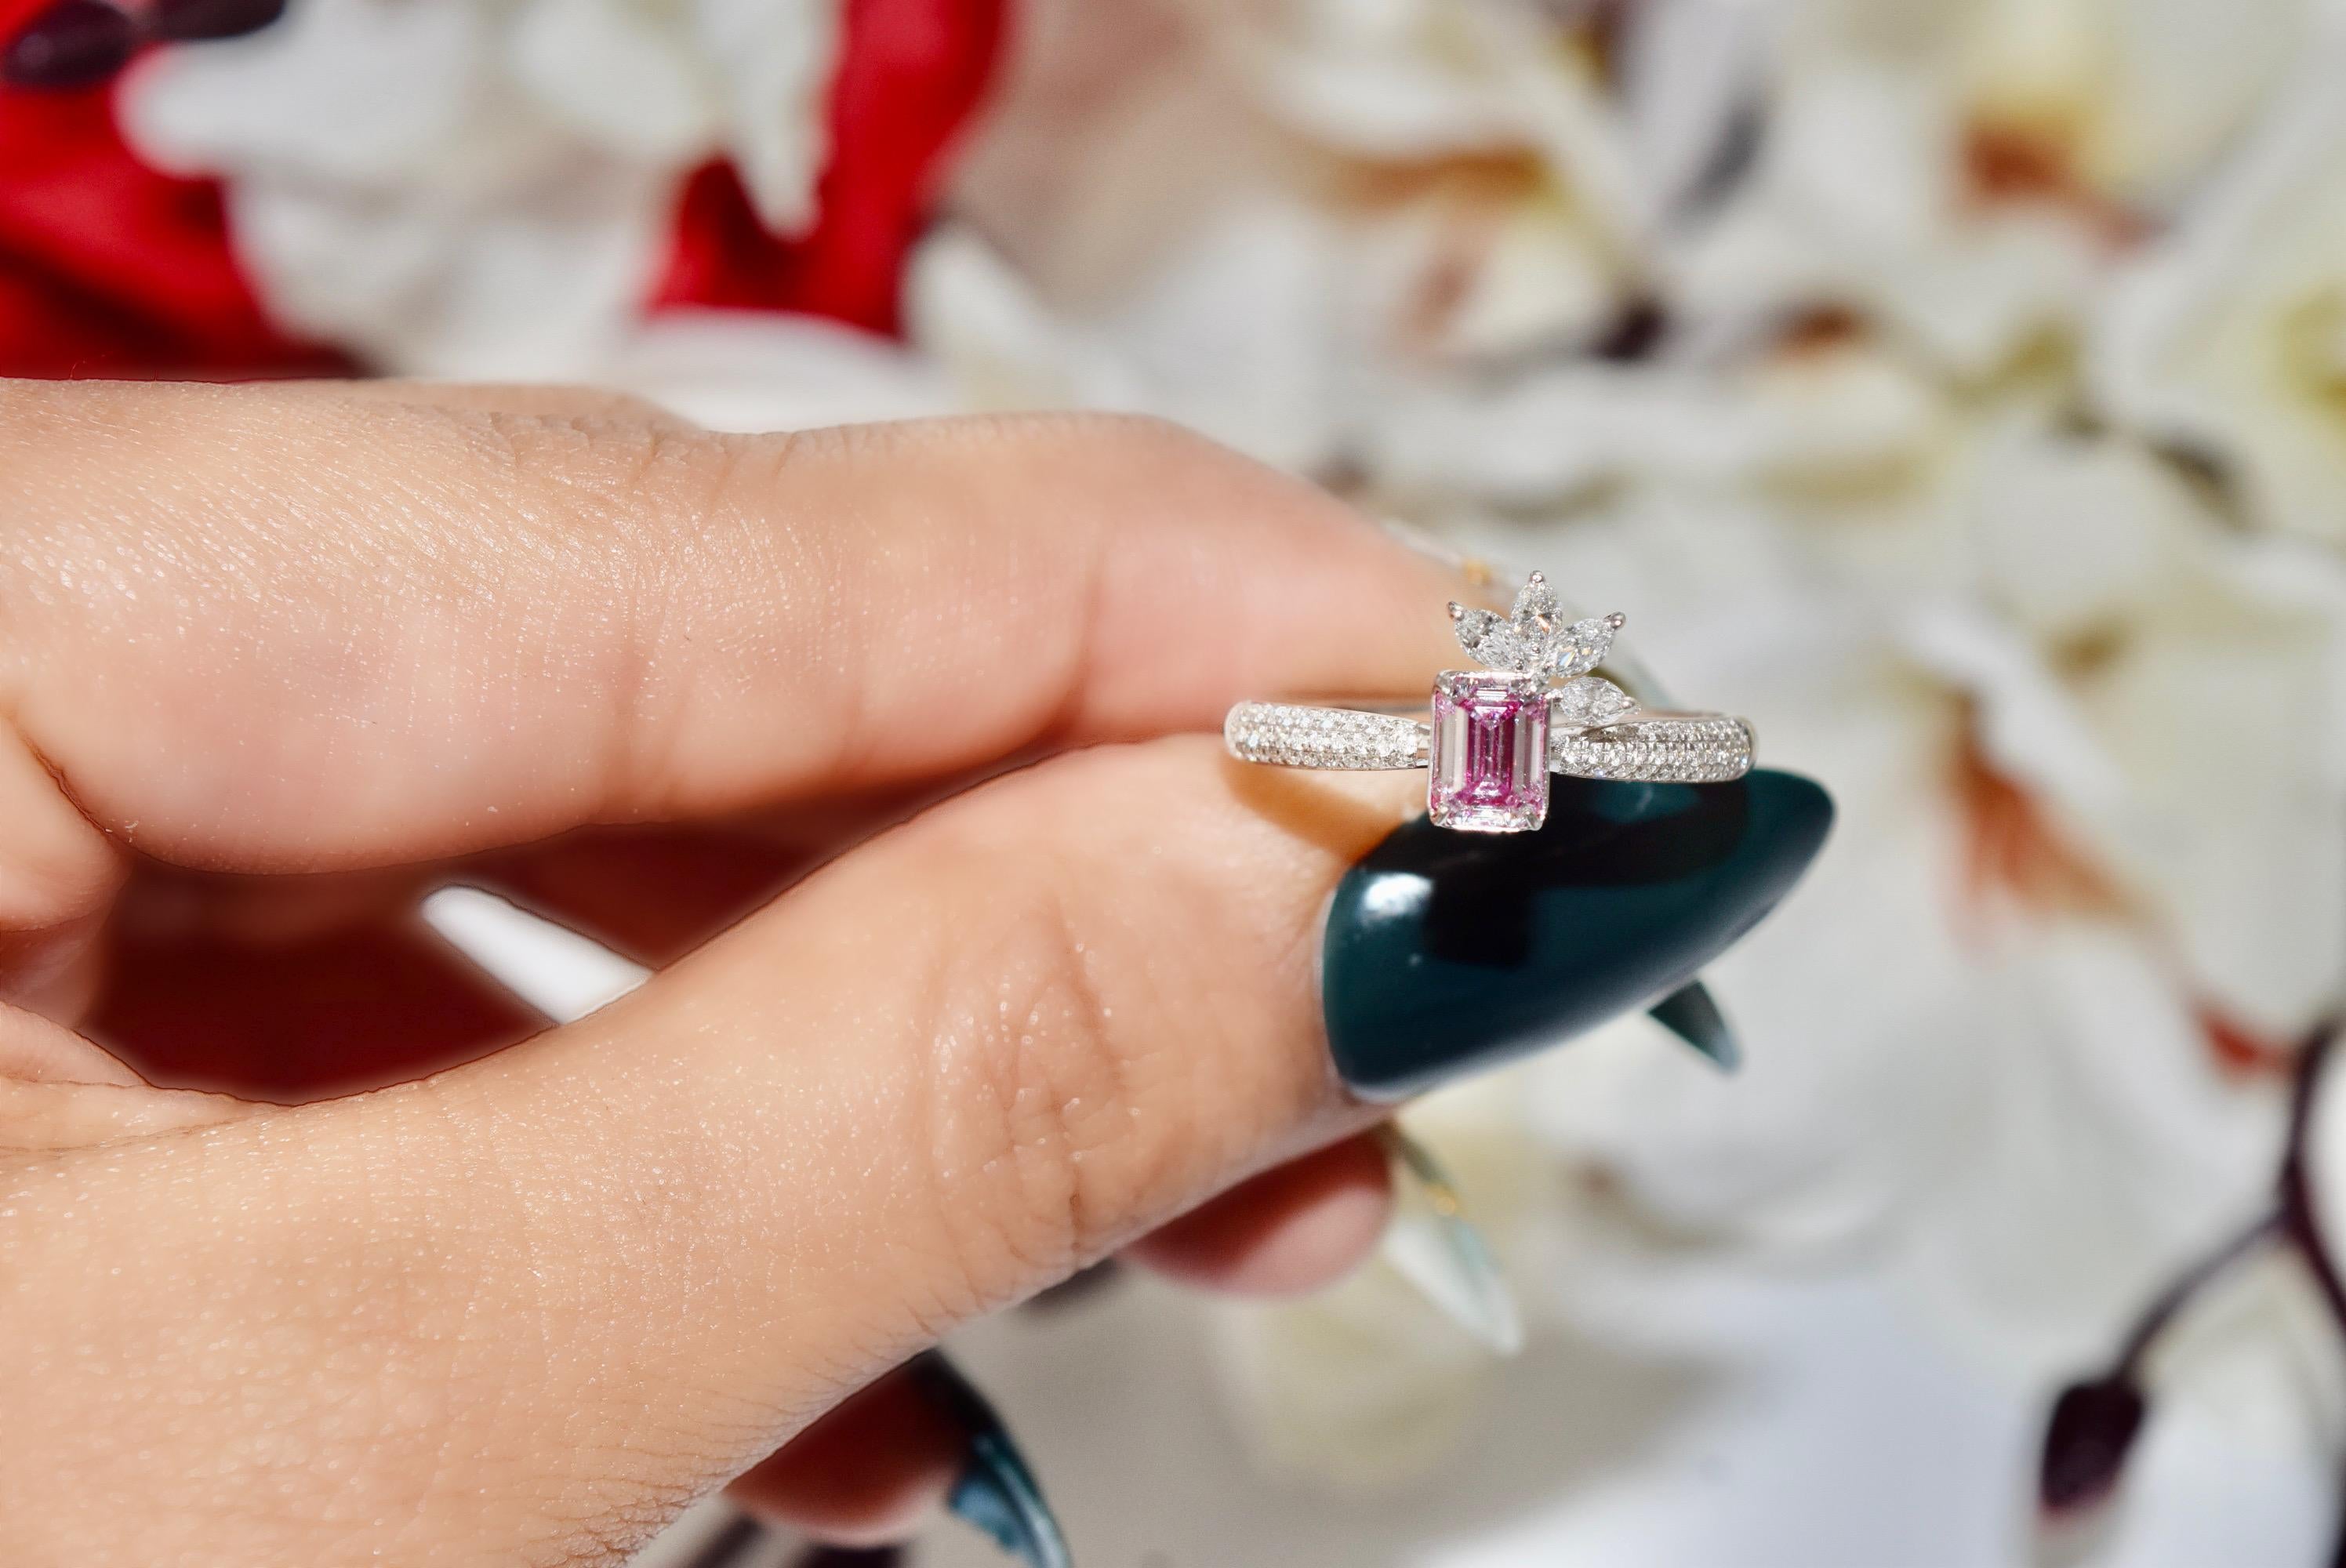 **100% NATURAL FANCY COLOUR DIAMOND JEWELLERIES**

✪ Jewelry Details ✪

♦ MAIN STONE DETAILS

➛ Stone Shape: Emerald
➛ Stone Color: Faint pink
➛ Stone Weight: 0.51 carats
➛ Clarity: SI1
➛ GIA certified

♦ SIDE STONE DETAILS

➛ Side white diamonds -